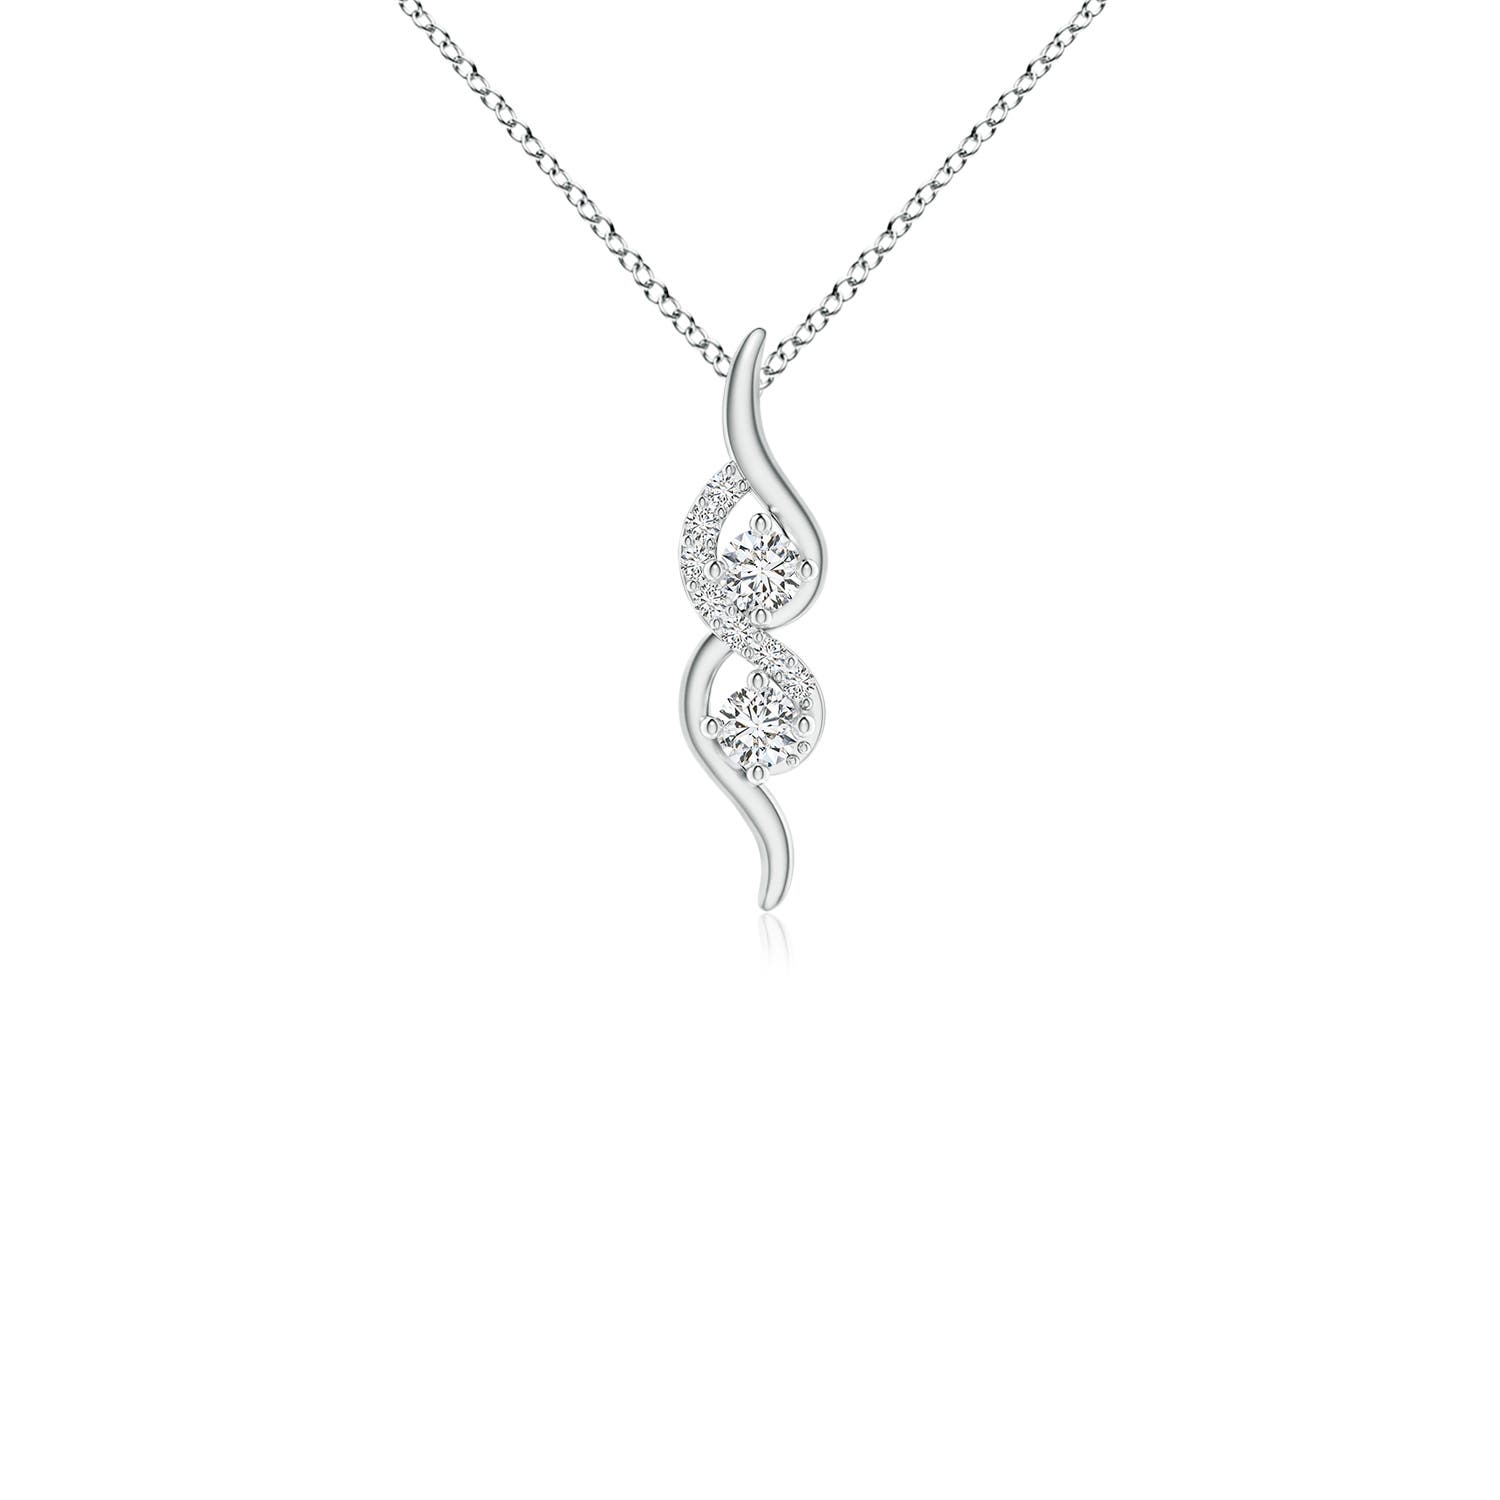 H, SI2 / 0.12 CT / 14 KT White Gold